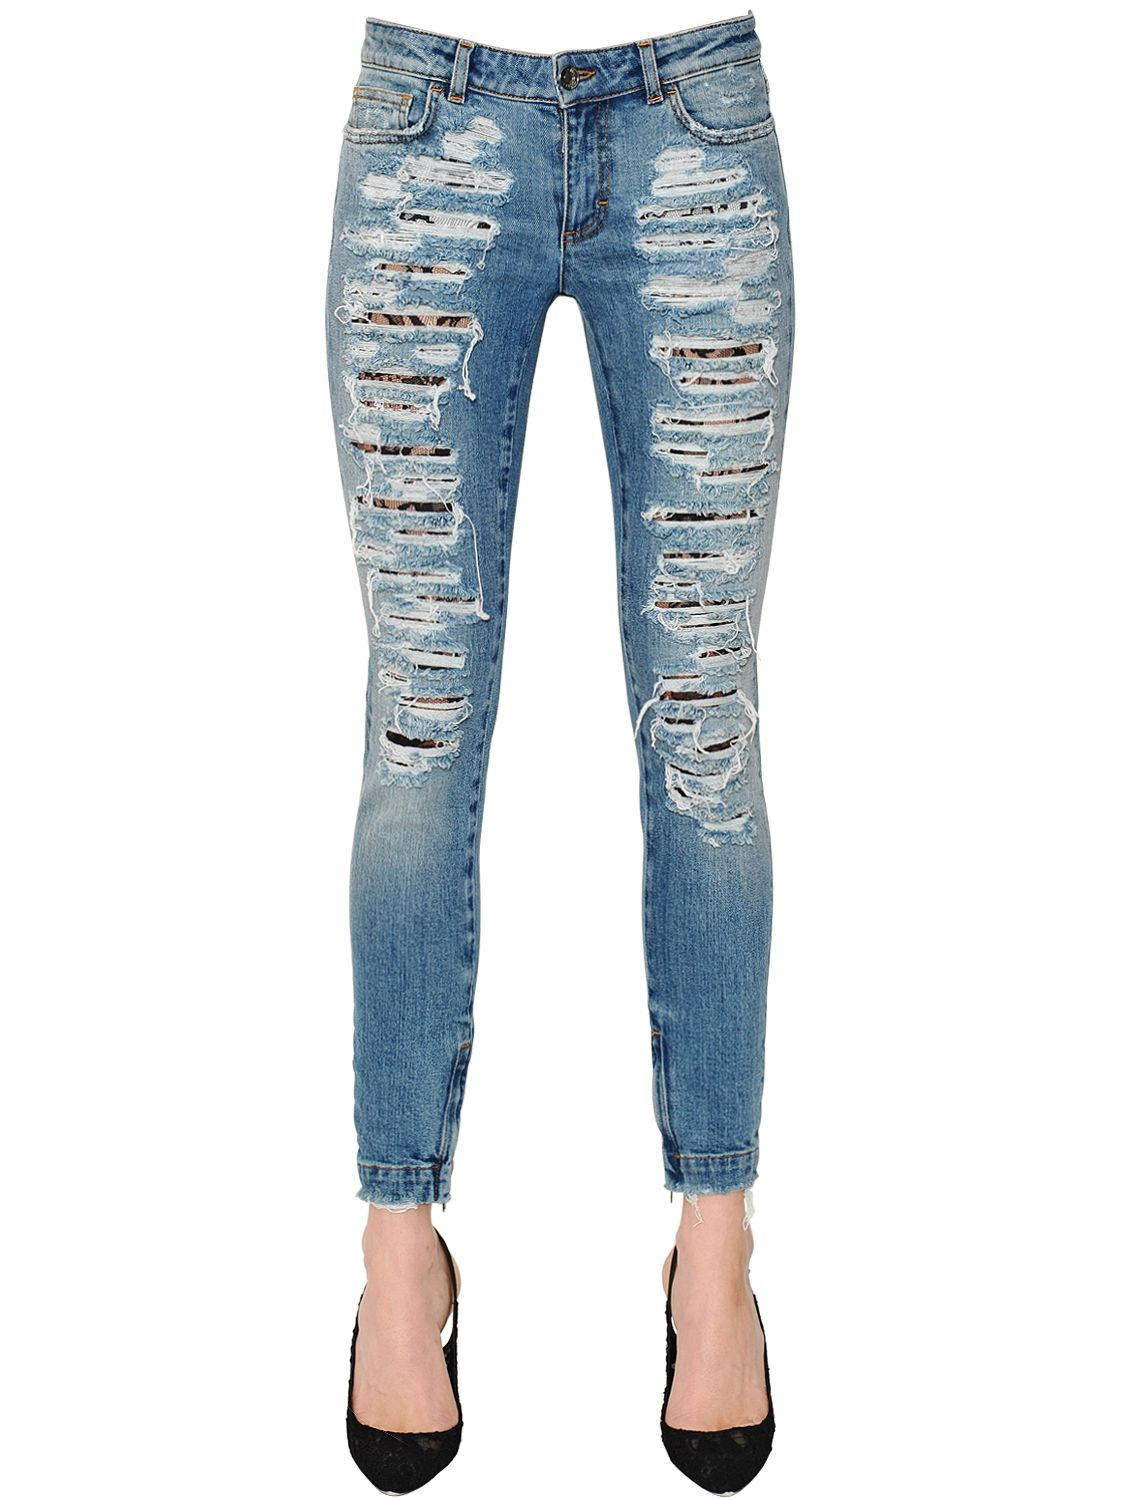 Lyst - Dolce & Gabbana Destroyed Denim Jeans With Lace Inserts in Blue